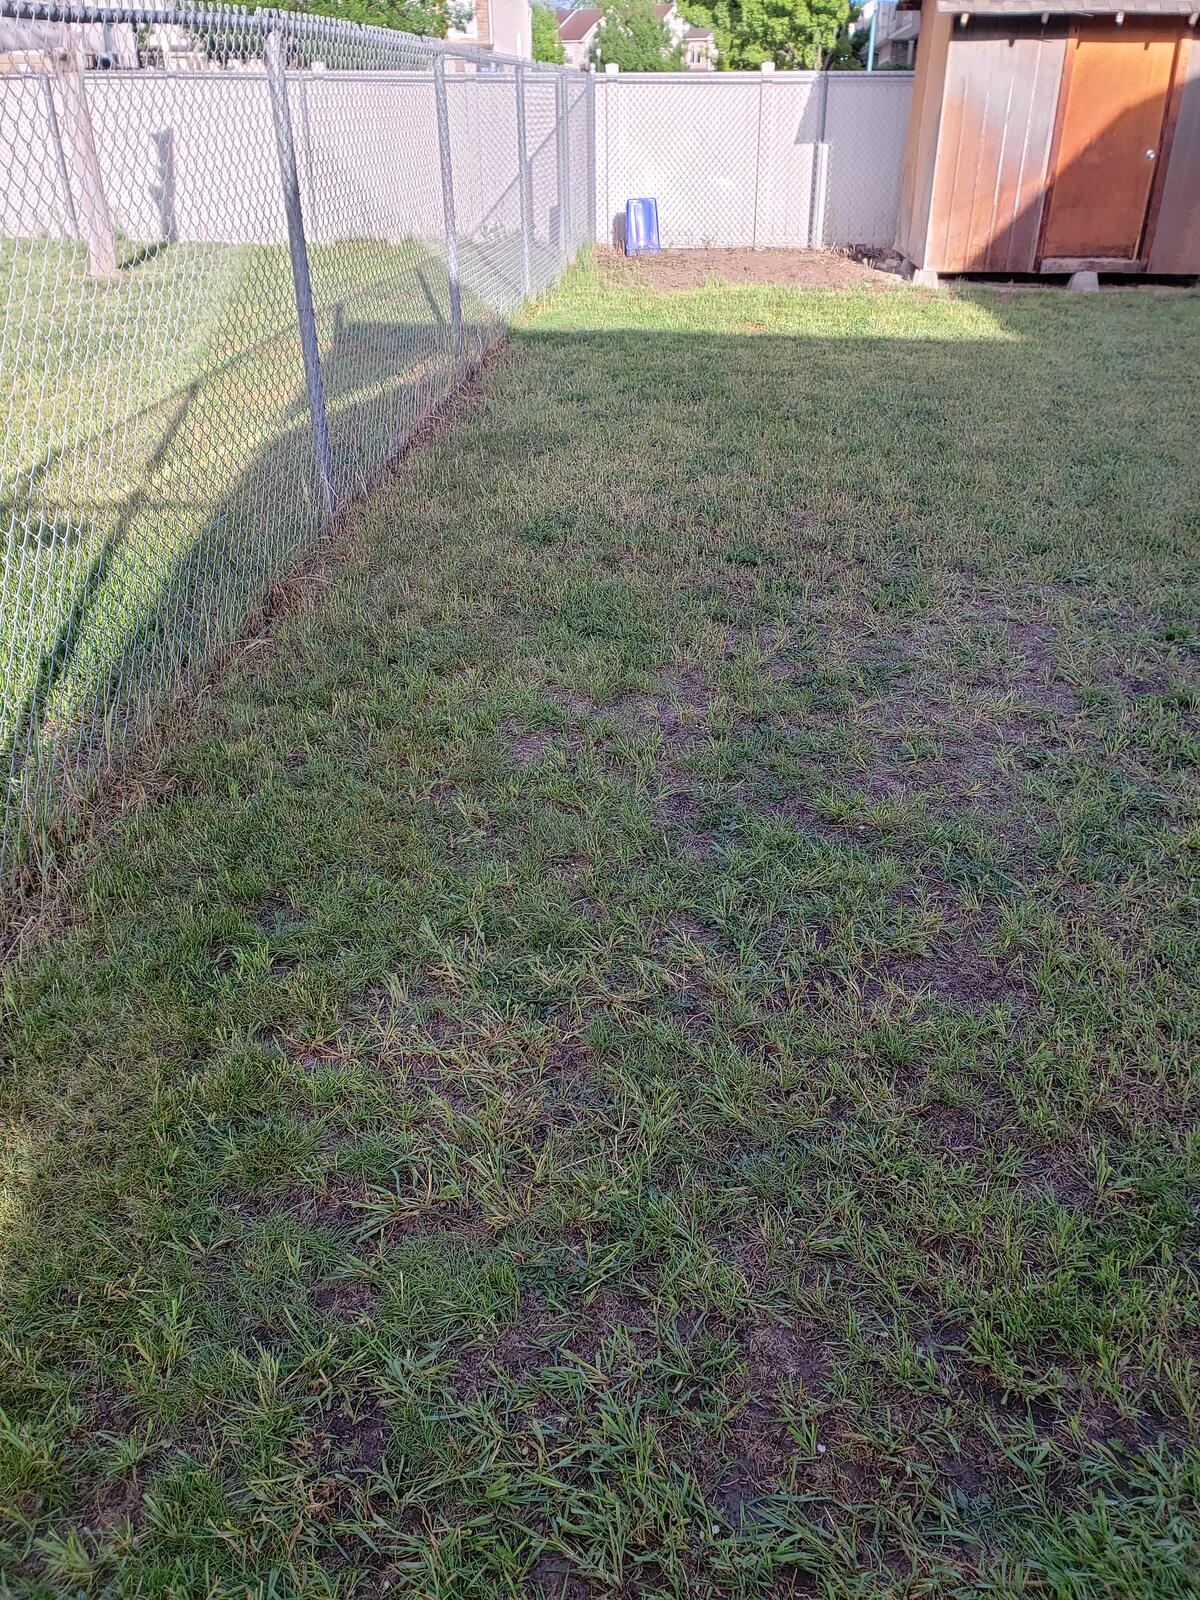 utah-turf-removal-pilot-program-to-pay-residents-to-remove-grass